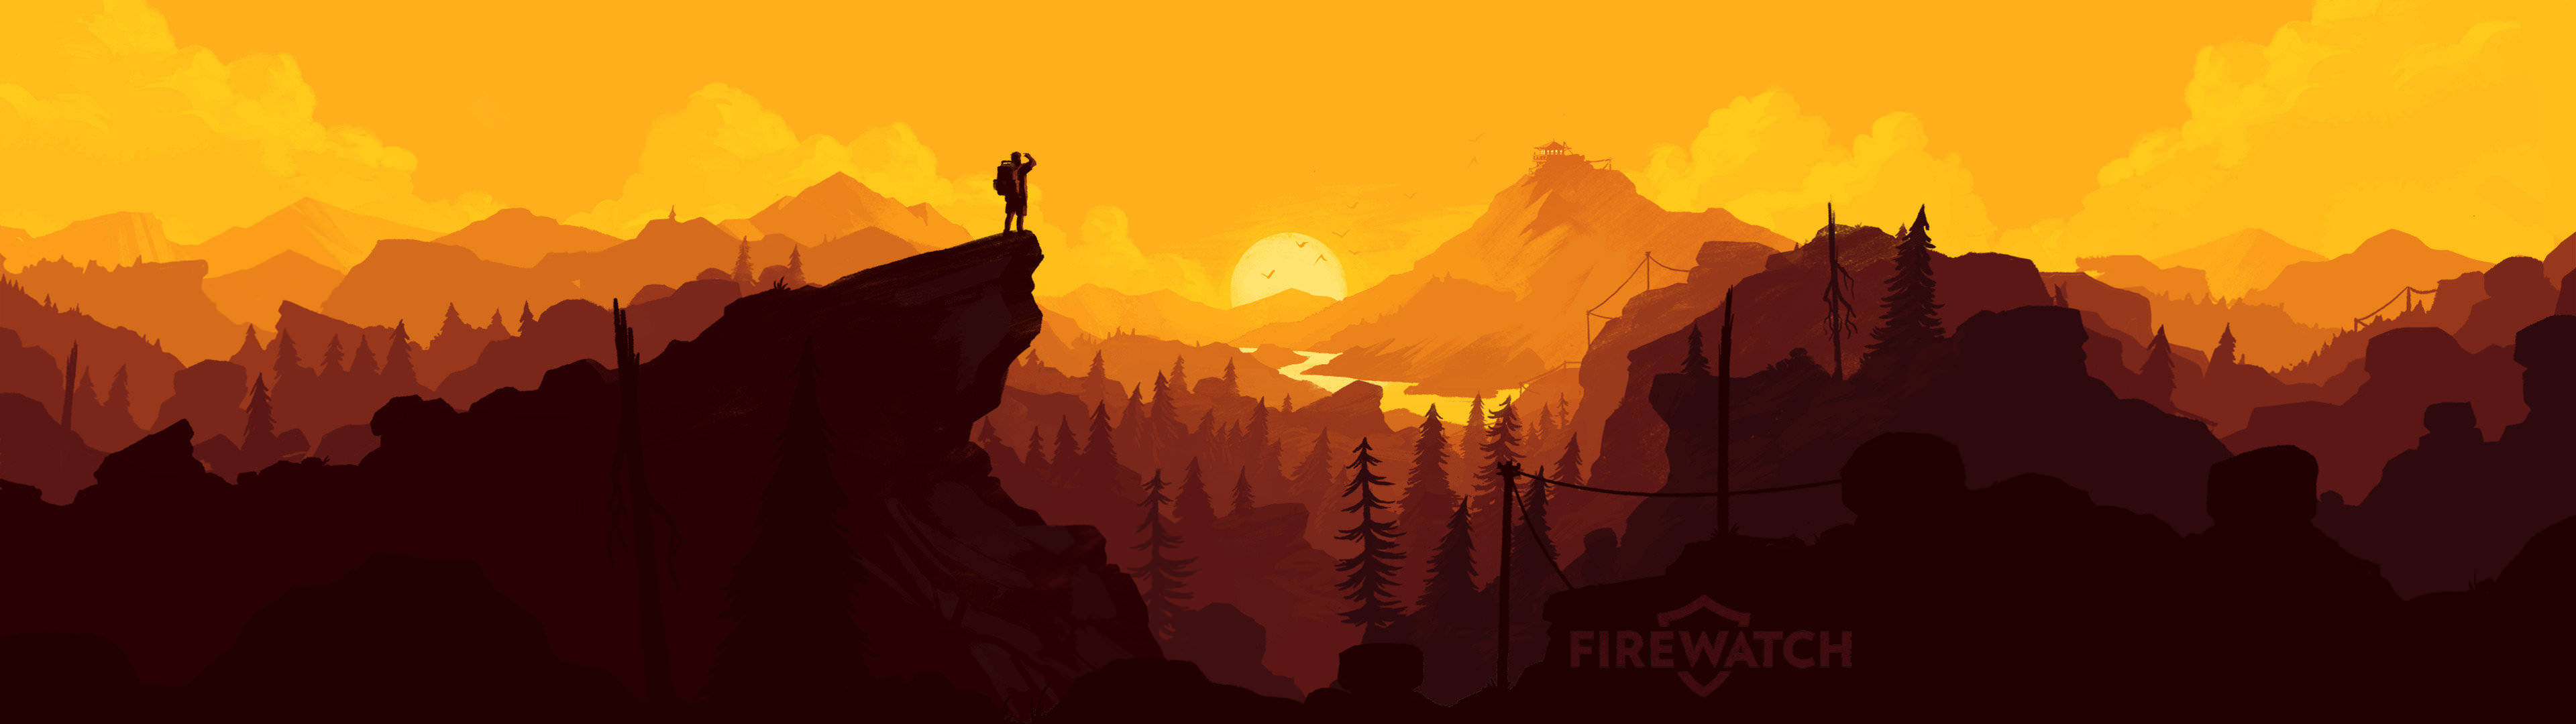 Dual Screen Firewatch Cover Picture